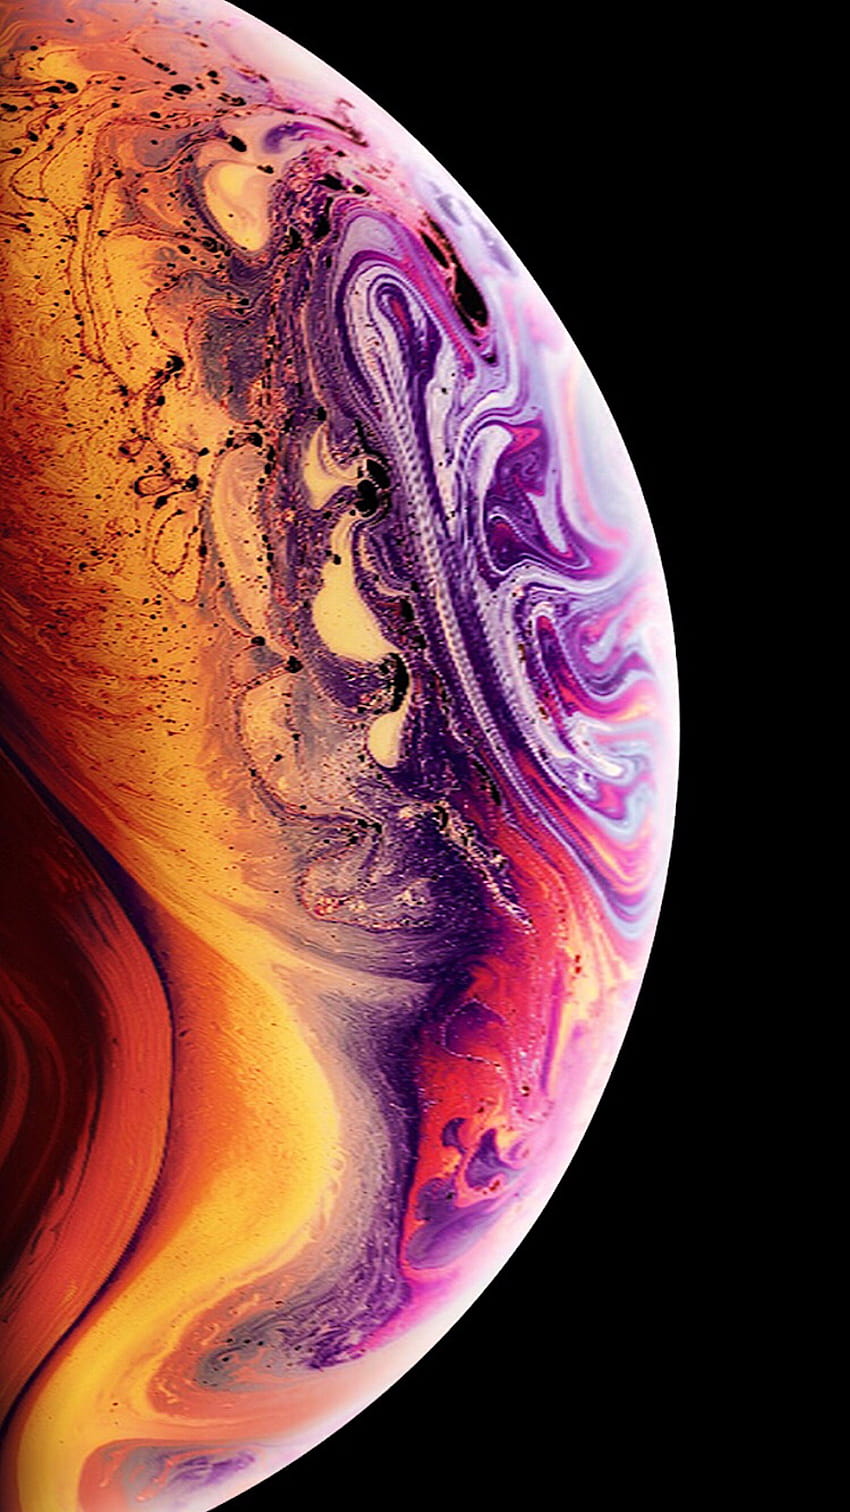 iPhone XS and XS Max in High Quality for, iphone xs HD phone wallpaper